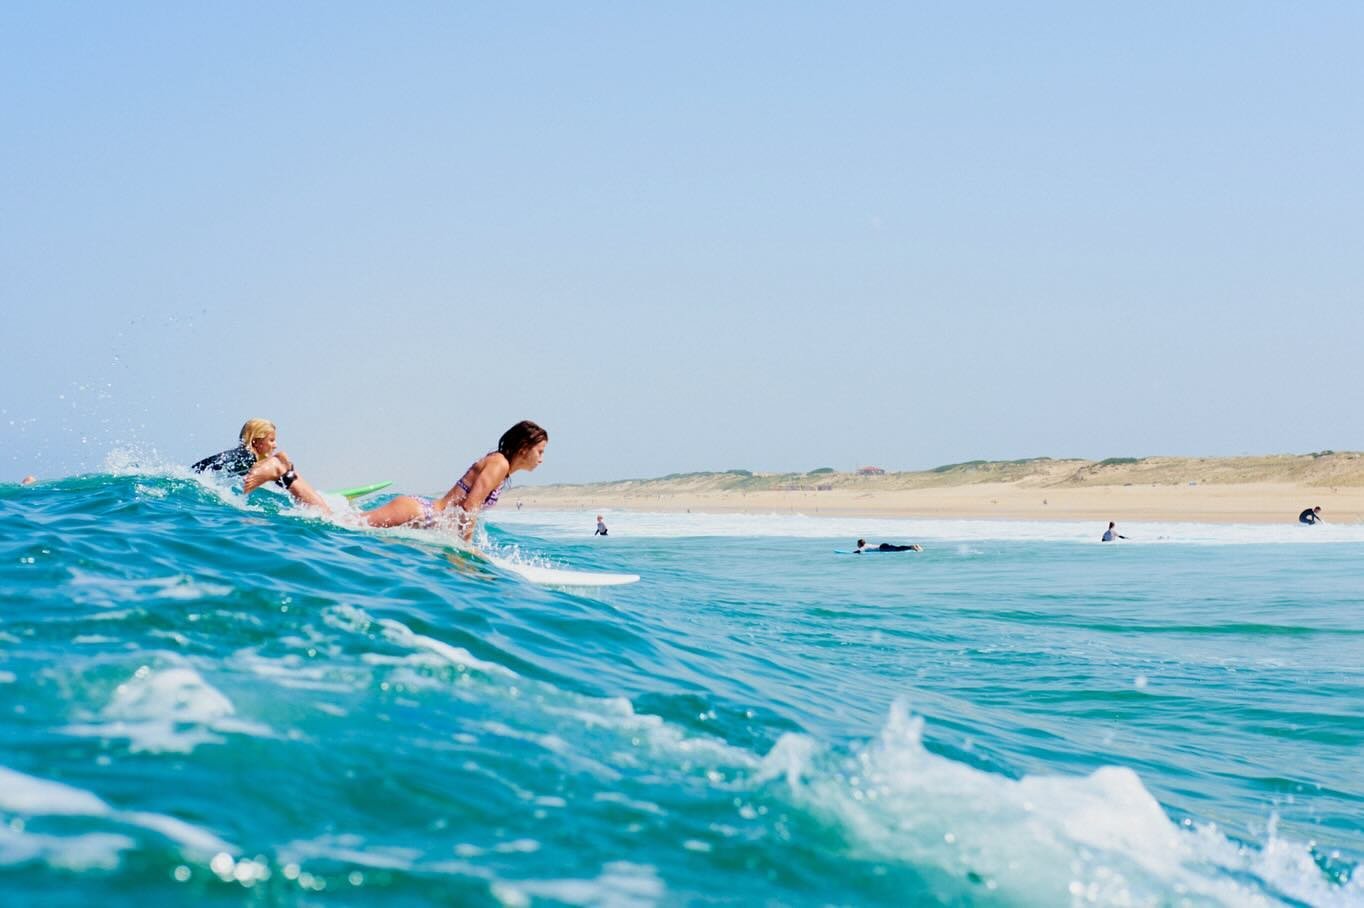 Summer is creeping up and we cannot wait to do this all day everyday  #surfhouse #hossegor 📸 @thomaskirby_